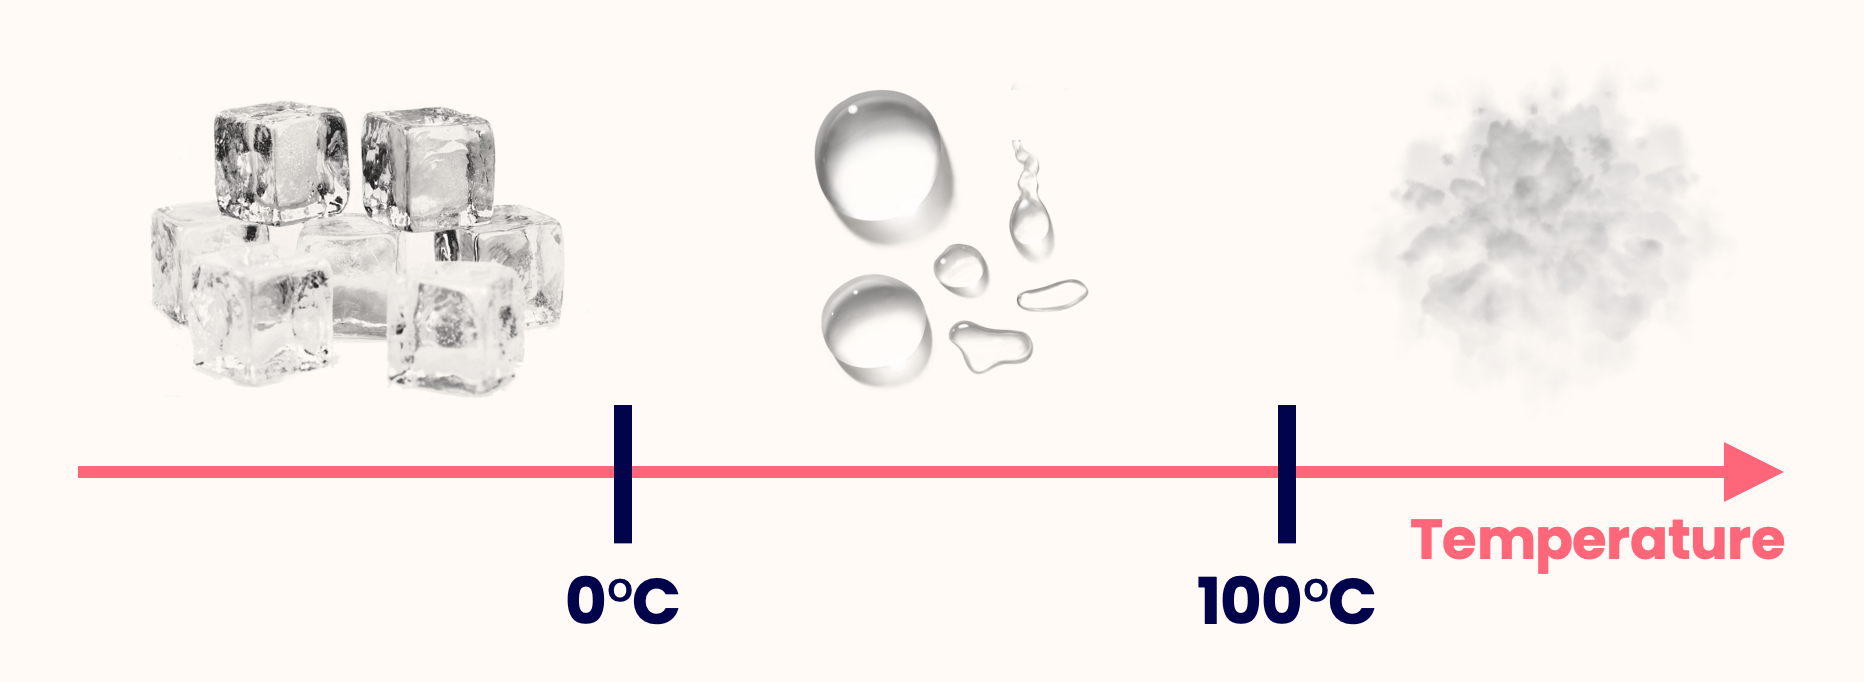 Water has a melting point of 0°C, and a boiling point of 100°C.